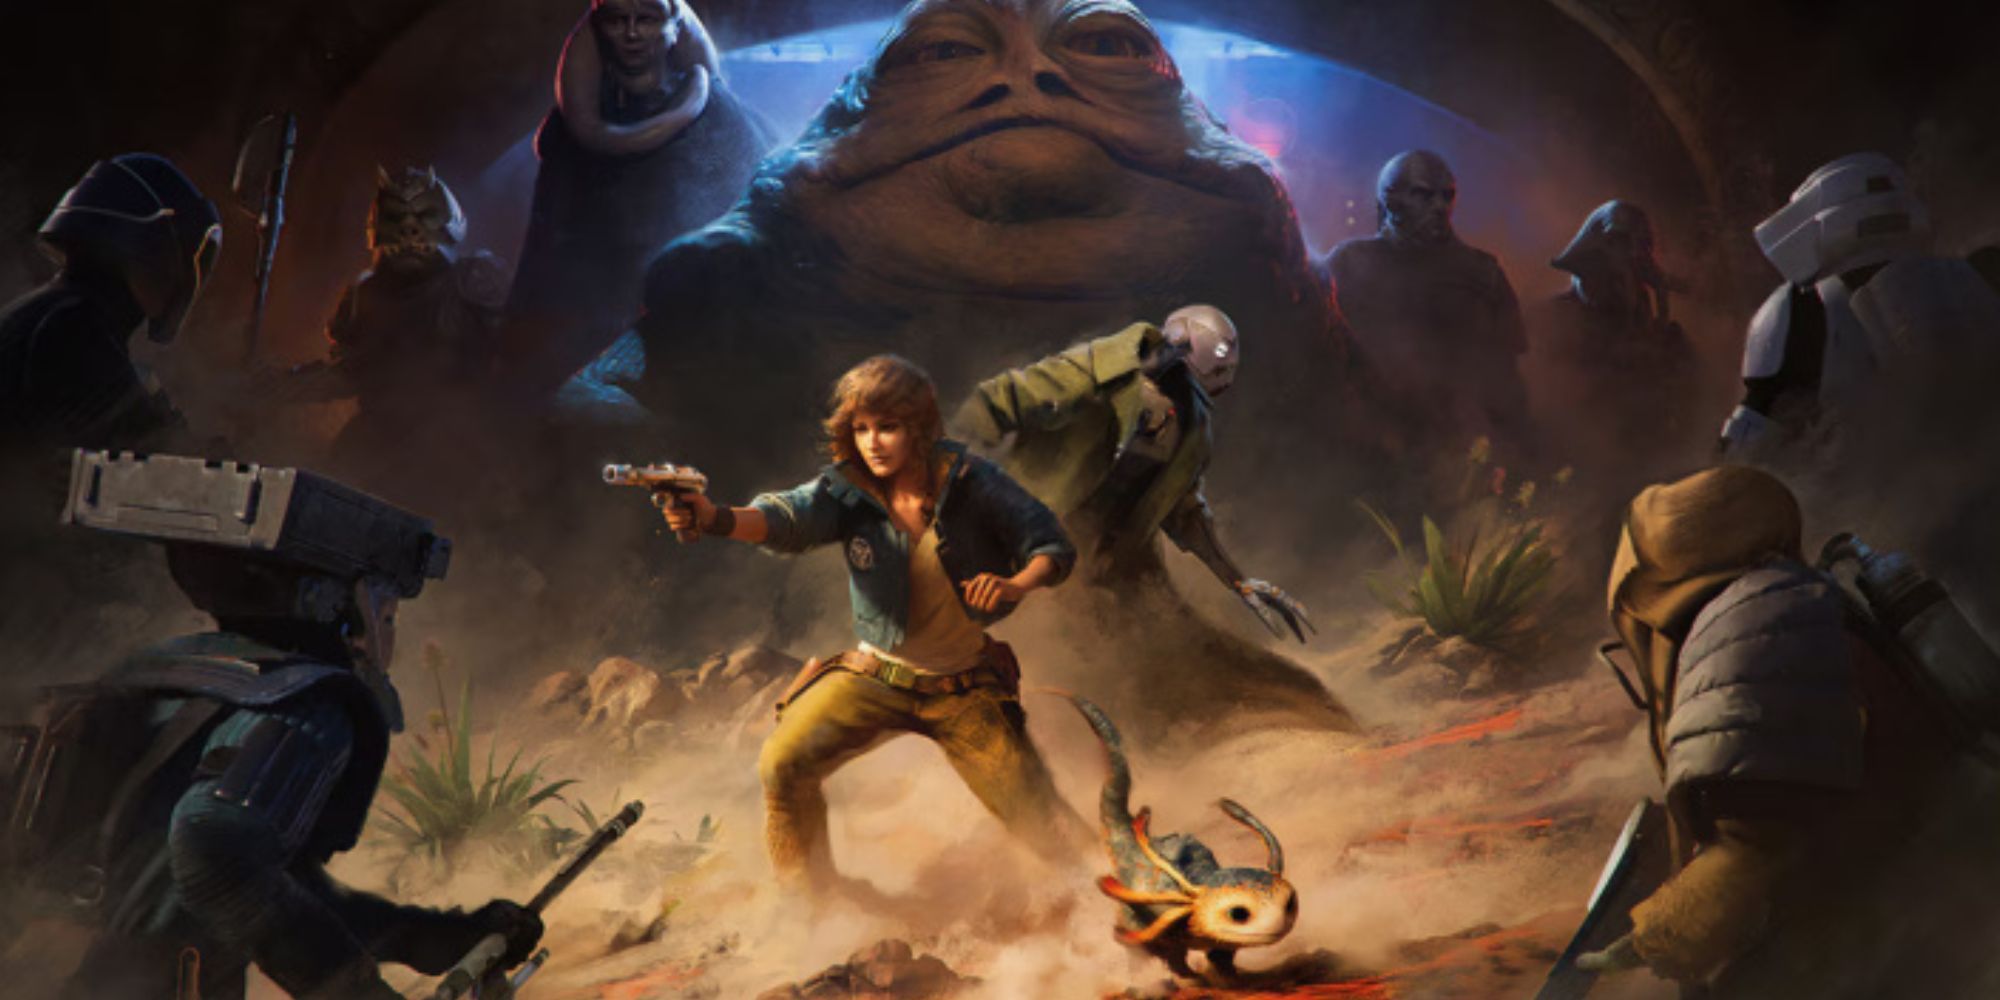 Characters from Star Wars Outlaws. Kay, Nix and ND-5 are in the middle, surronded by enemies. Jabba the Hutt is behind them